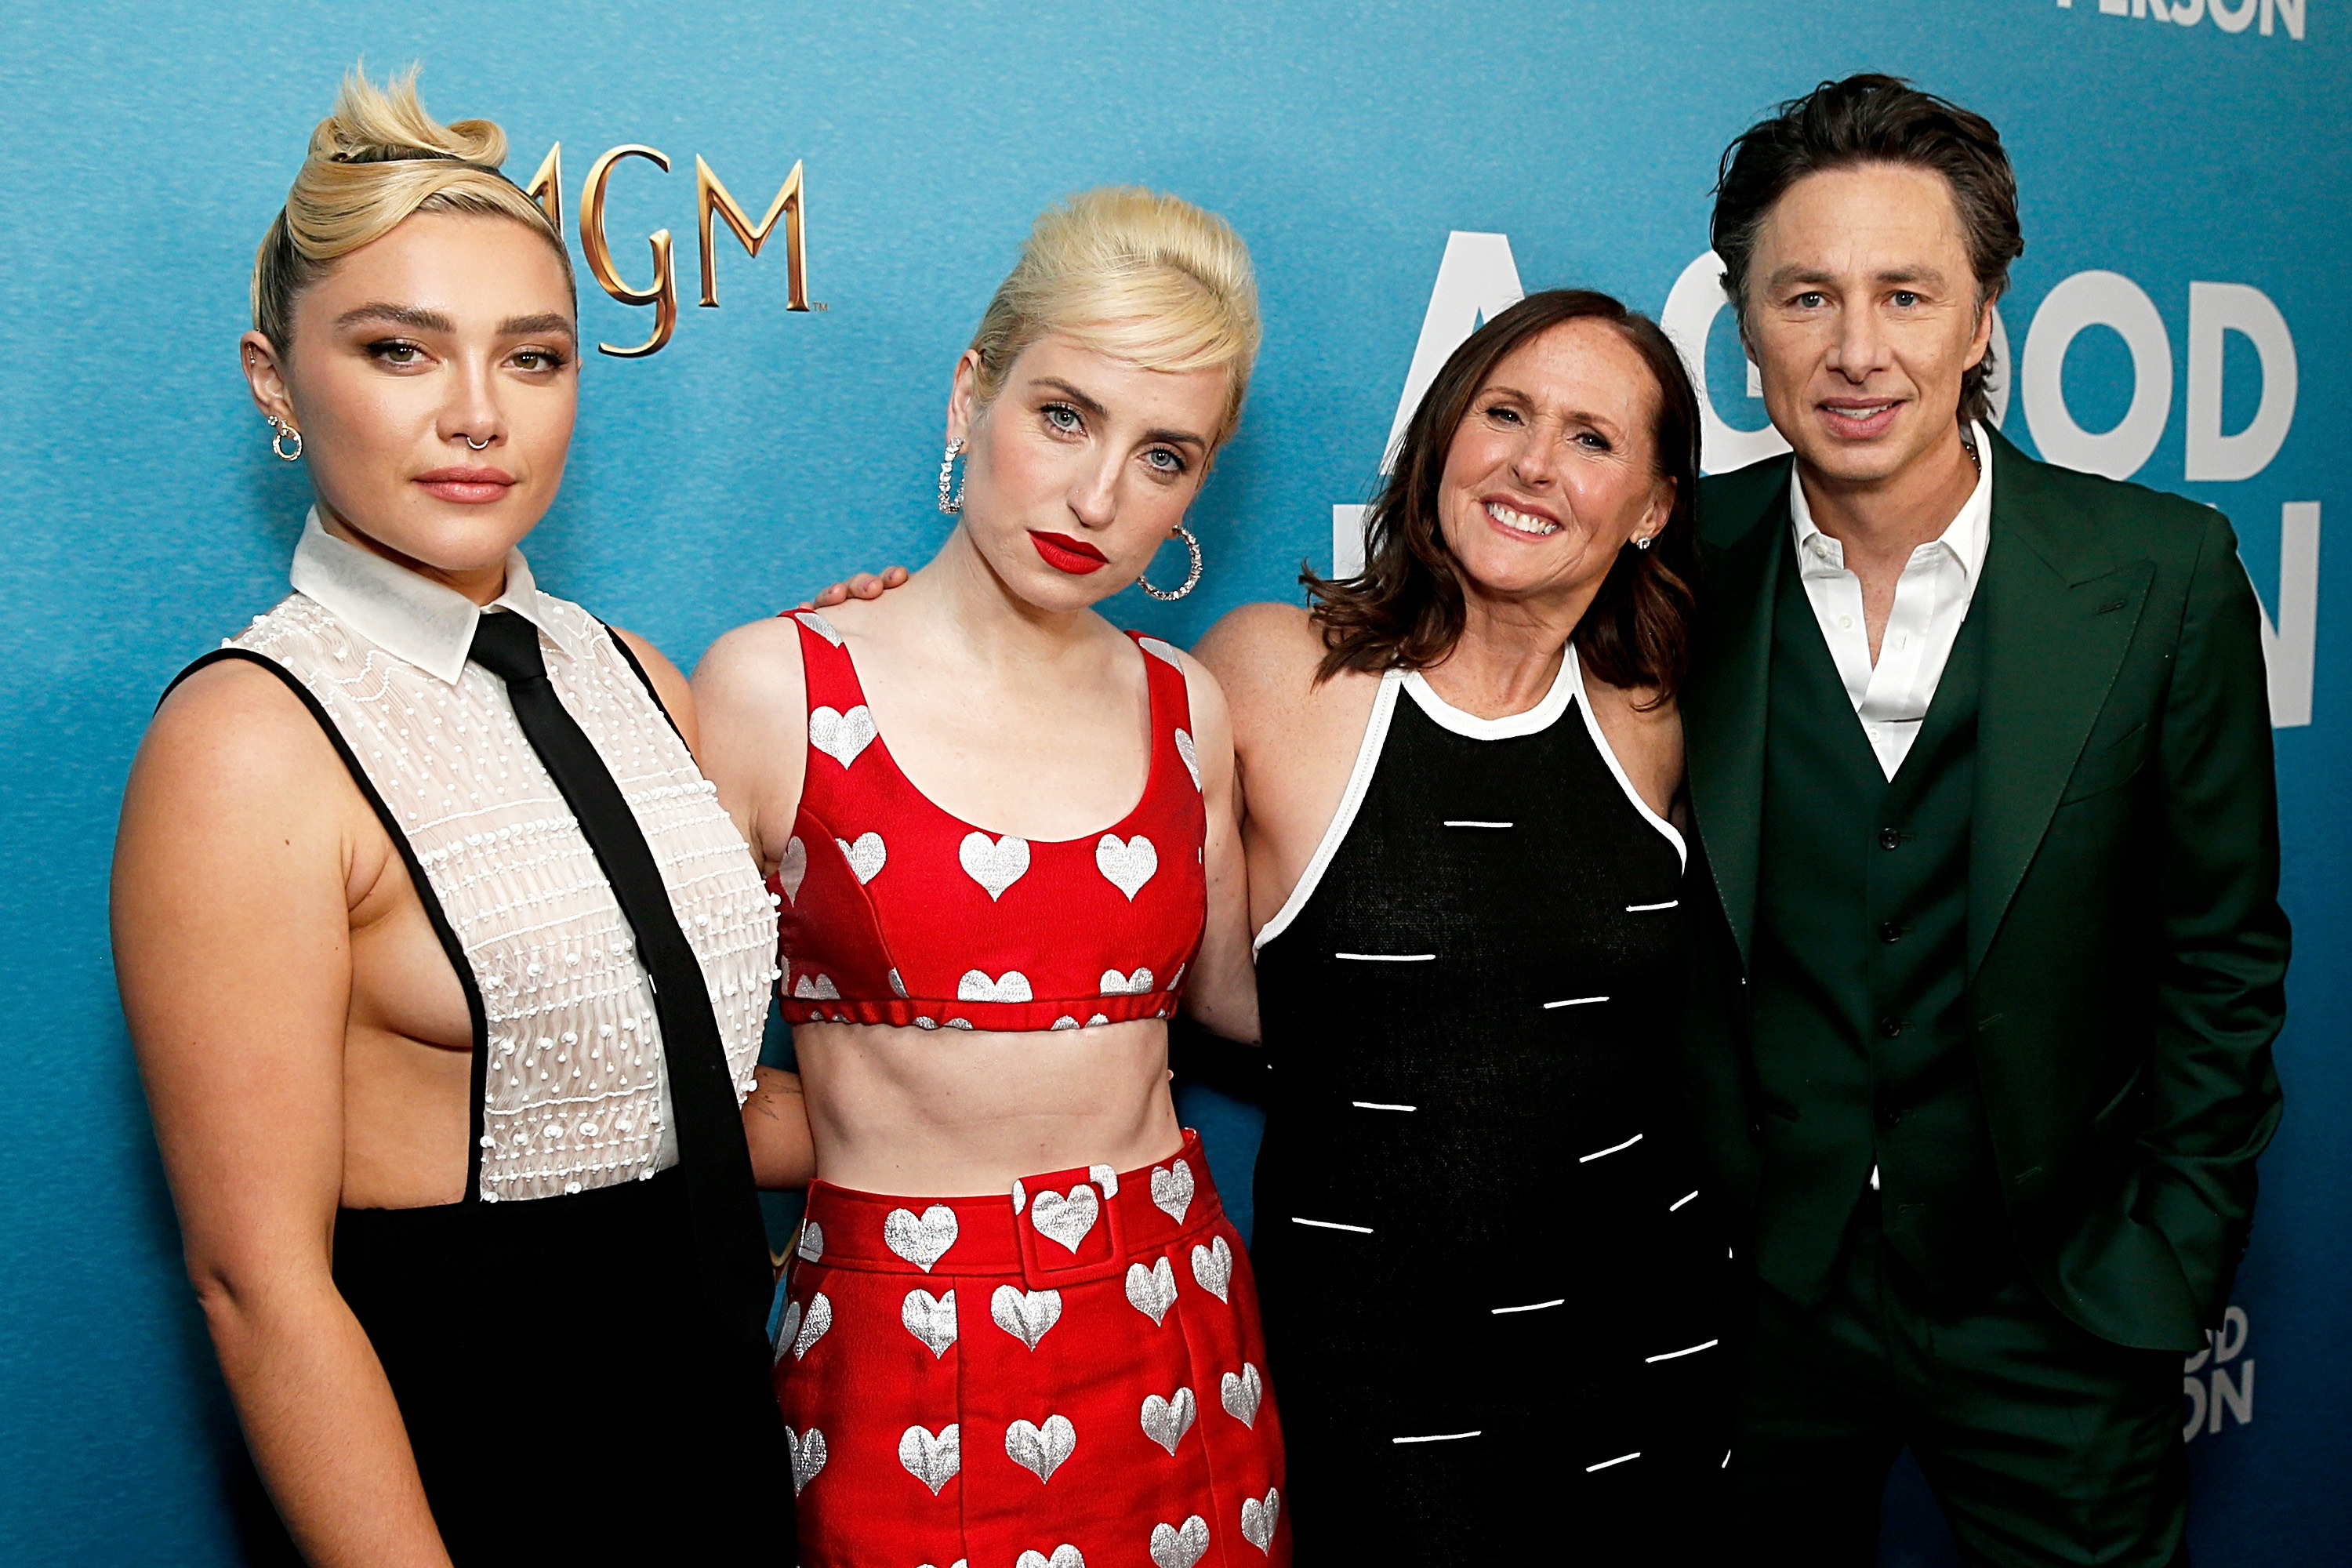 From left to right: Florence, Zoe Lister-Jones, Molly Shannon, and Zach Braff smile for a group photo on the red carpet